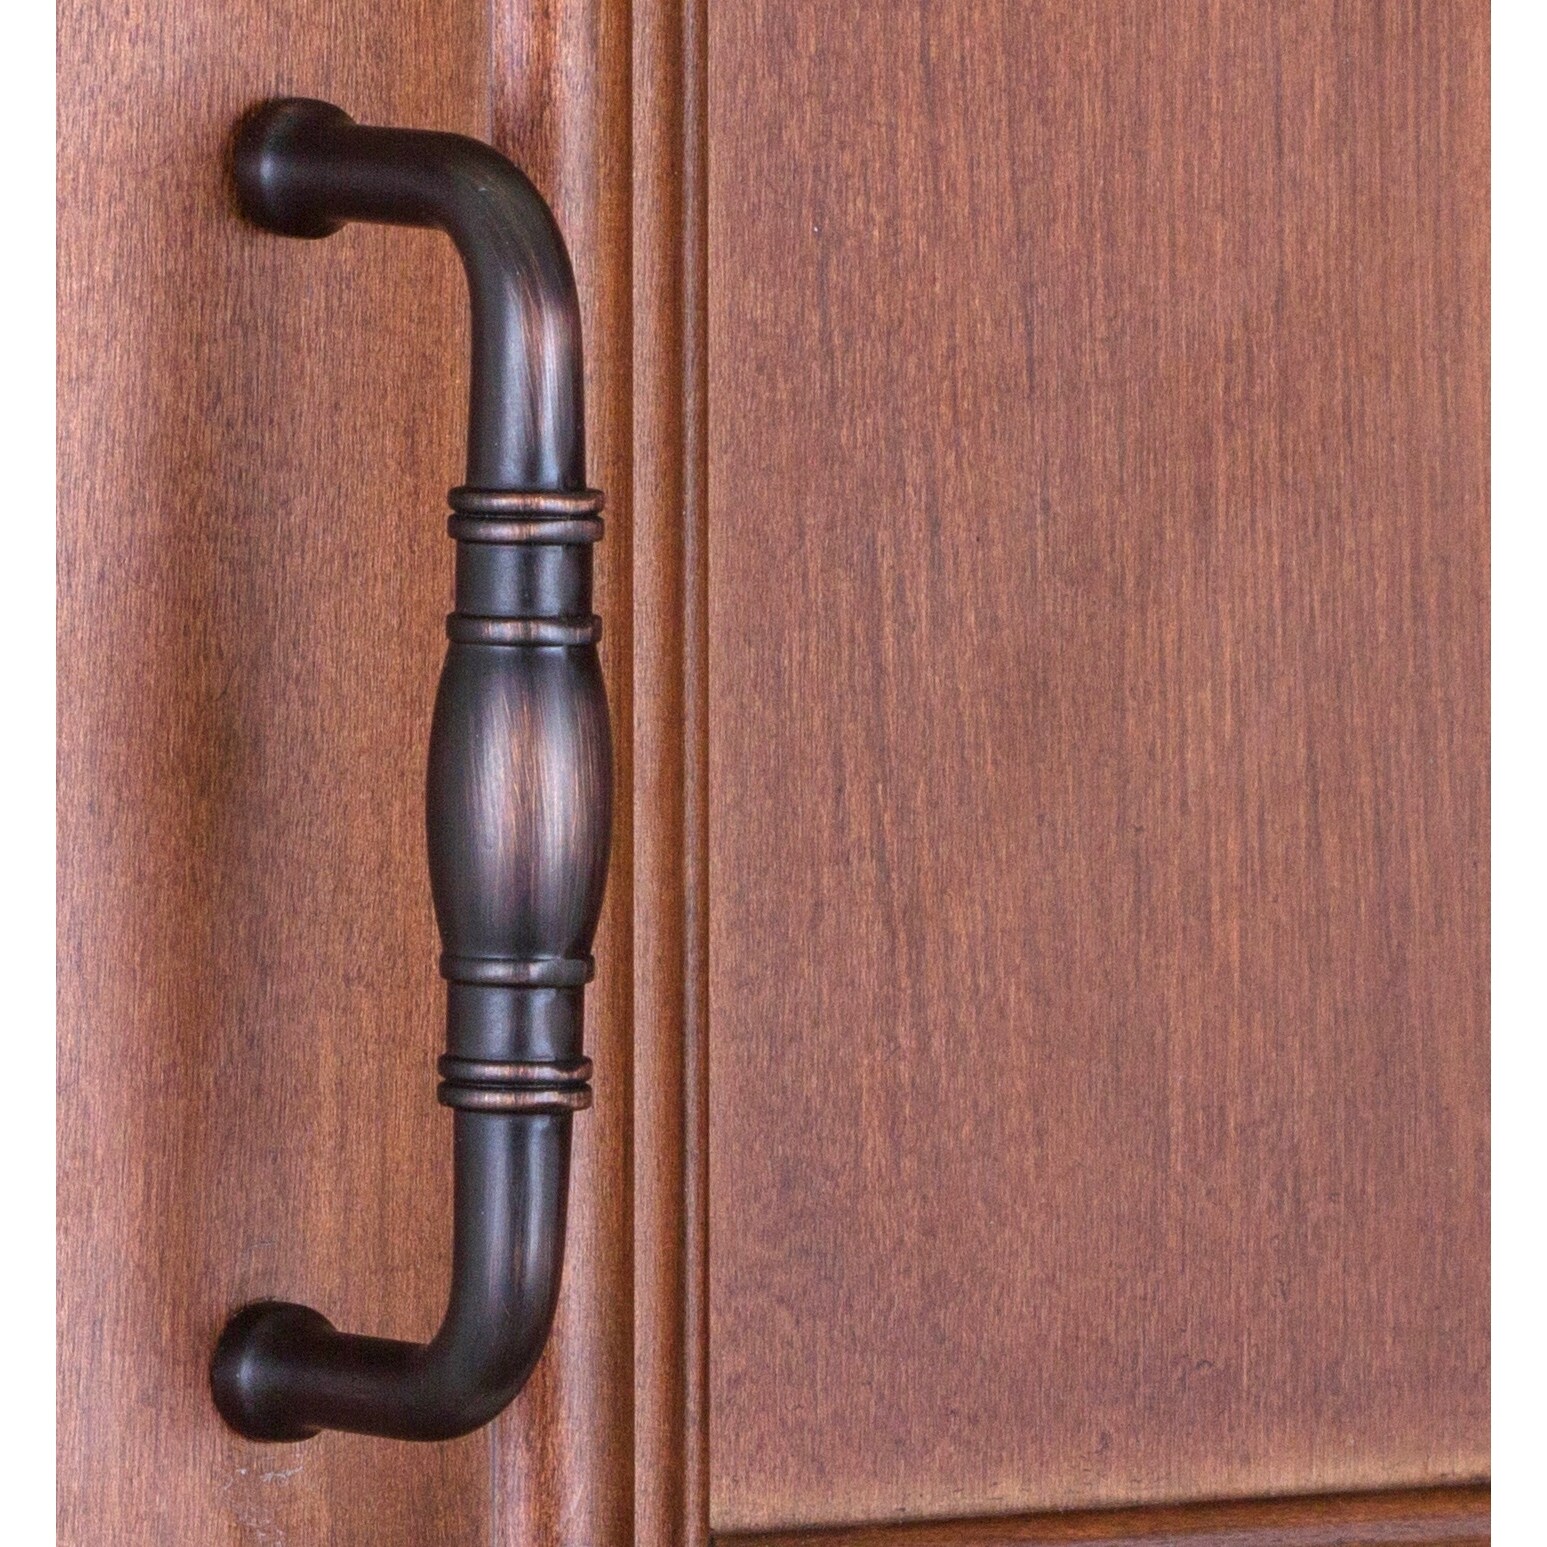 GlideRite 3 in. Center Classic Fluted Cabinet Pulls, Oil Rubbed Bronze, Pack of 25 - image 4 of 4